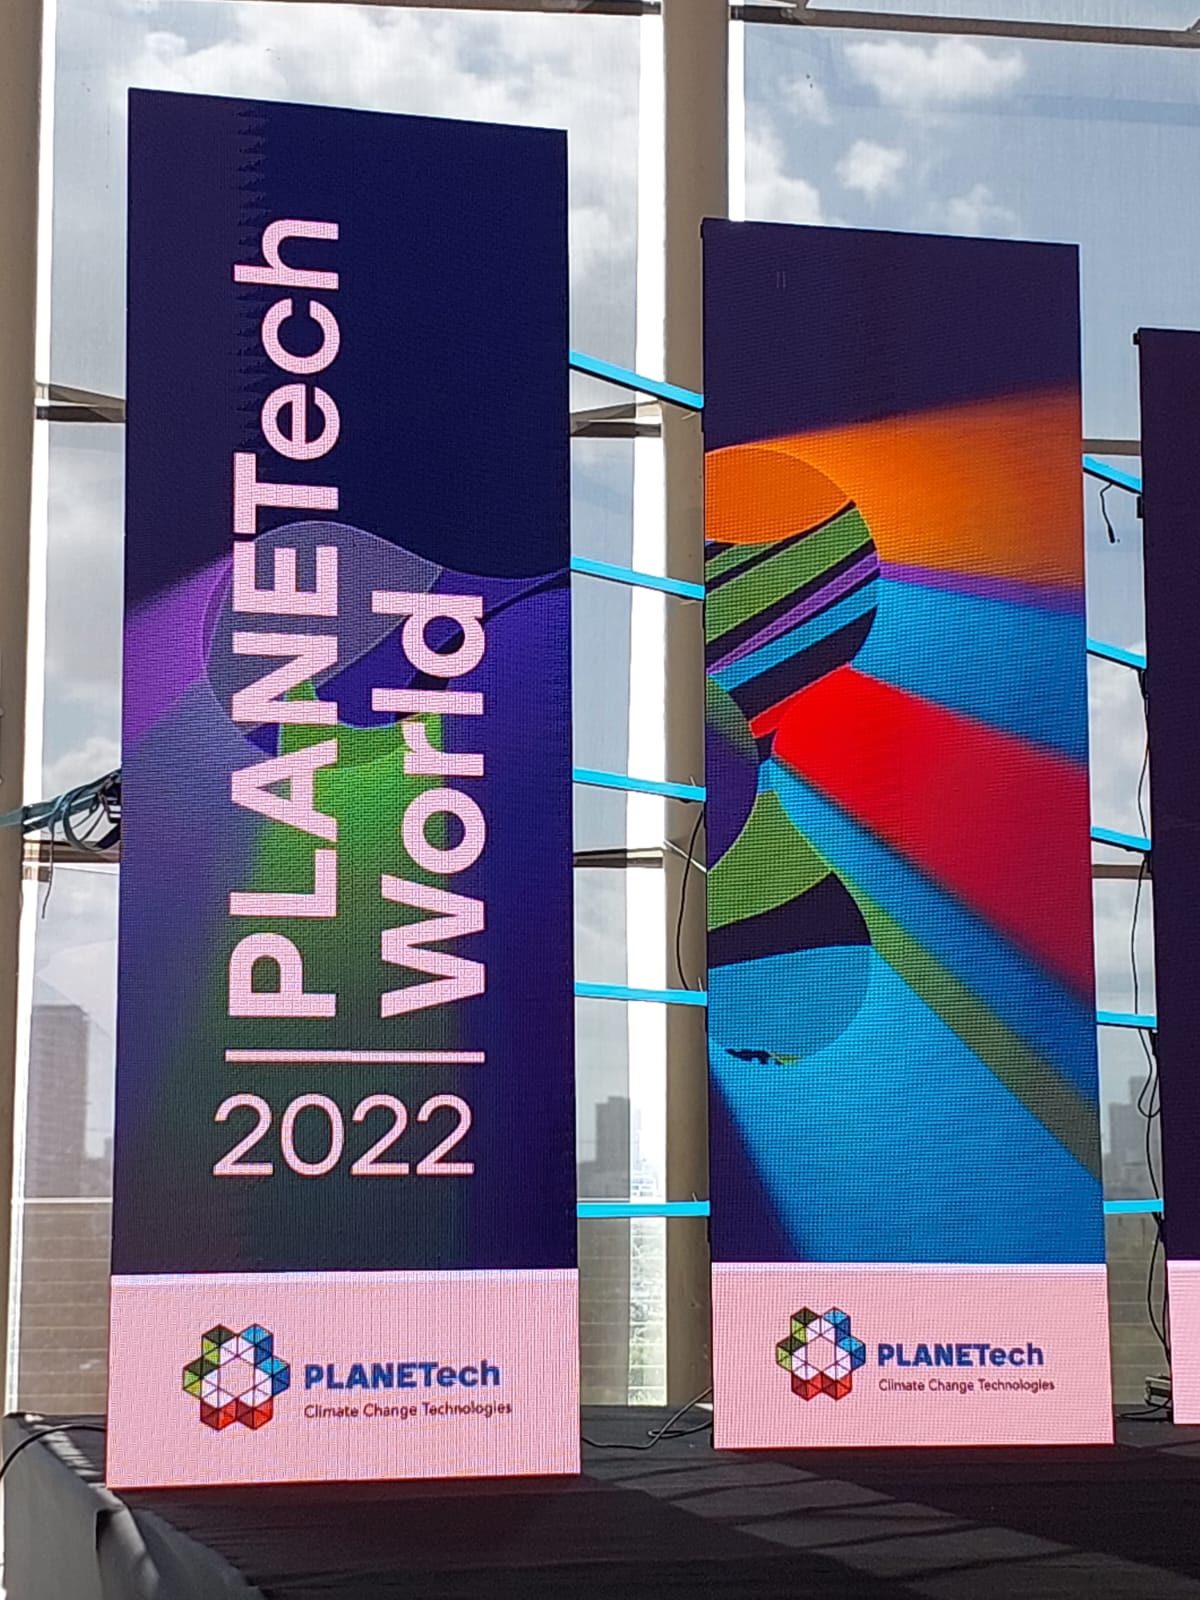 Co-Energy at PLANETech World 2022